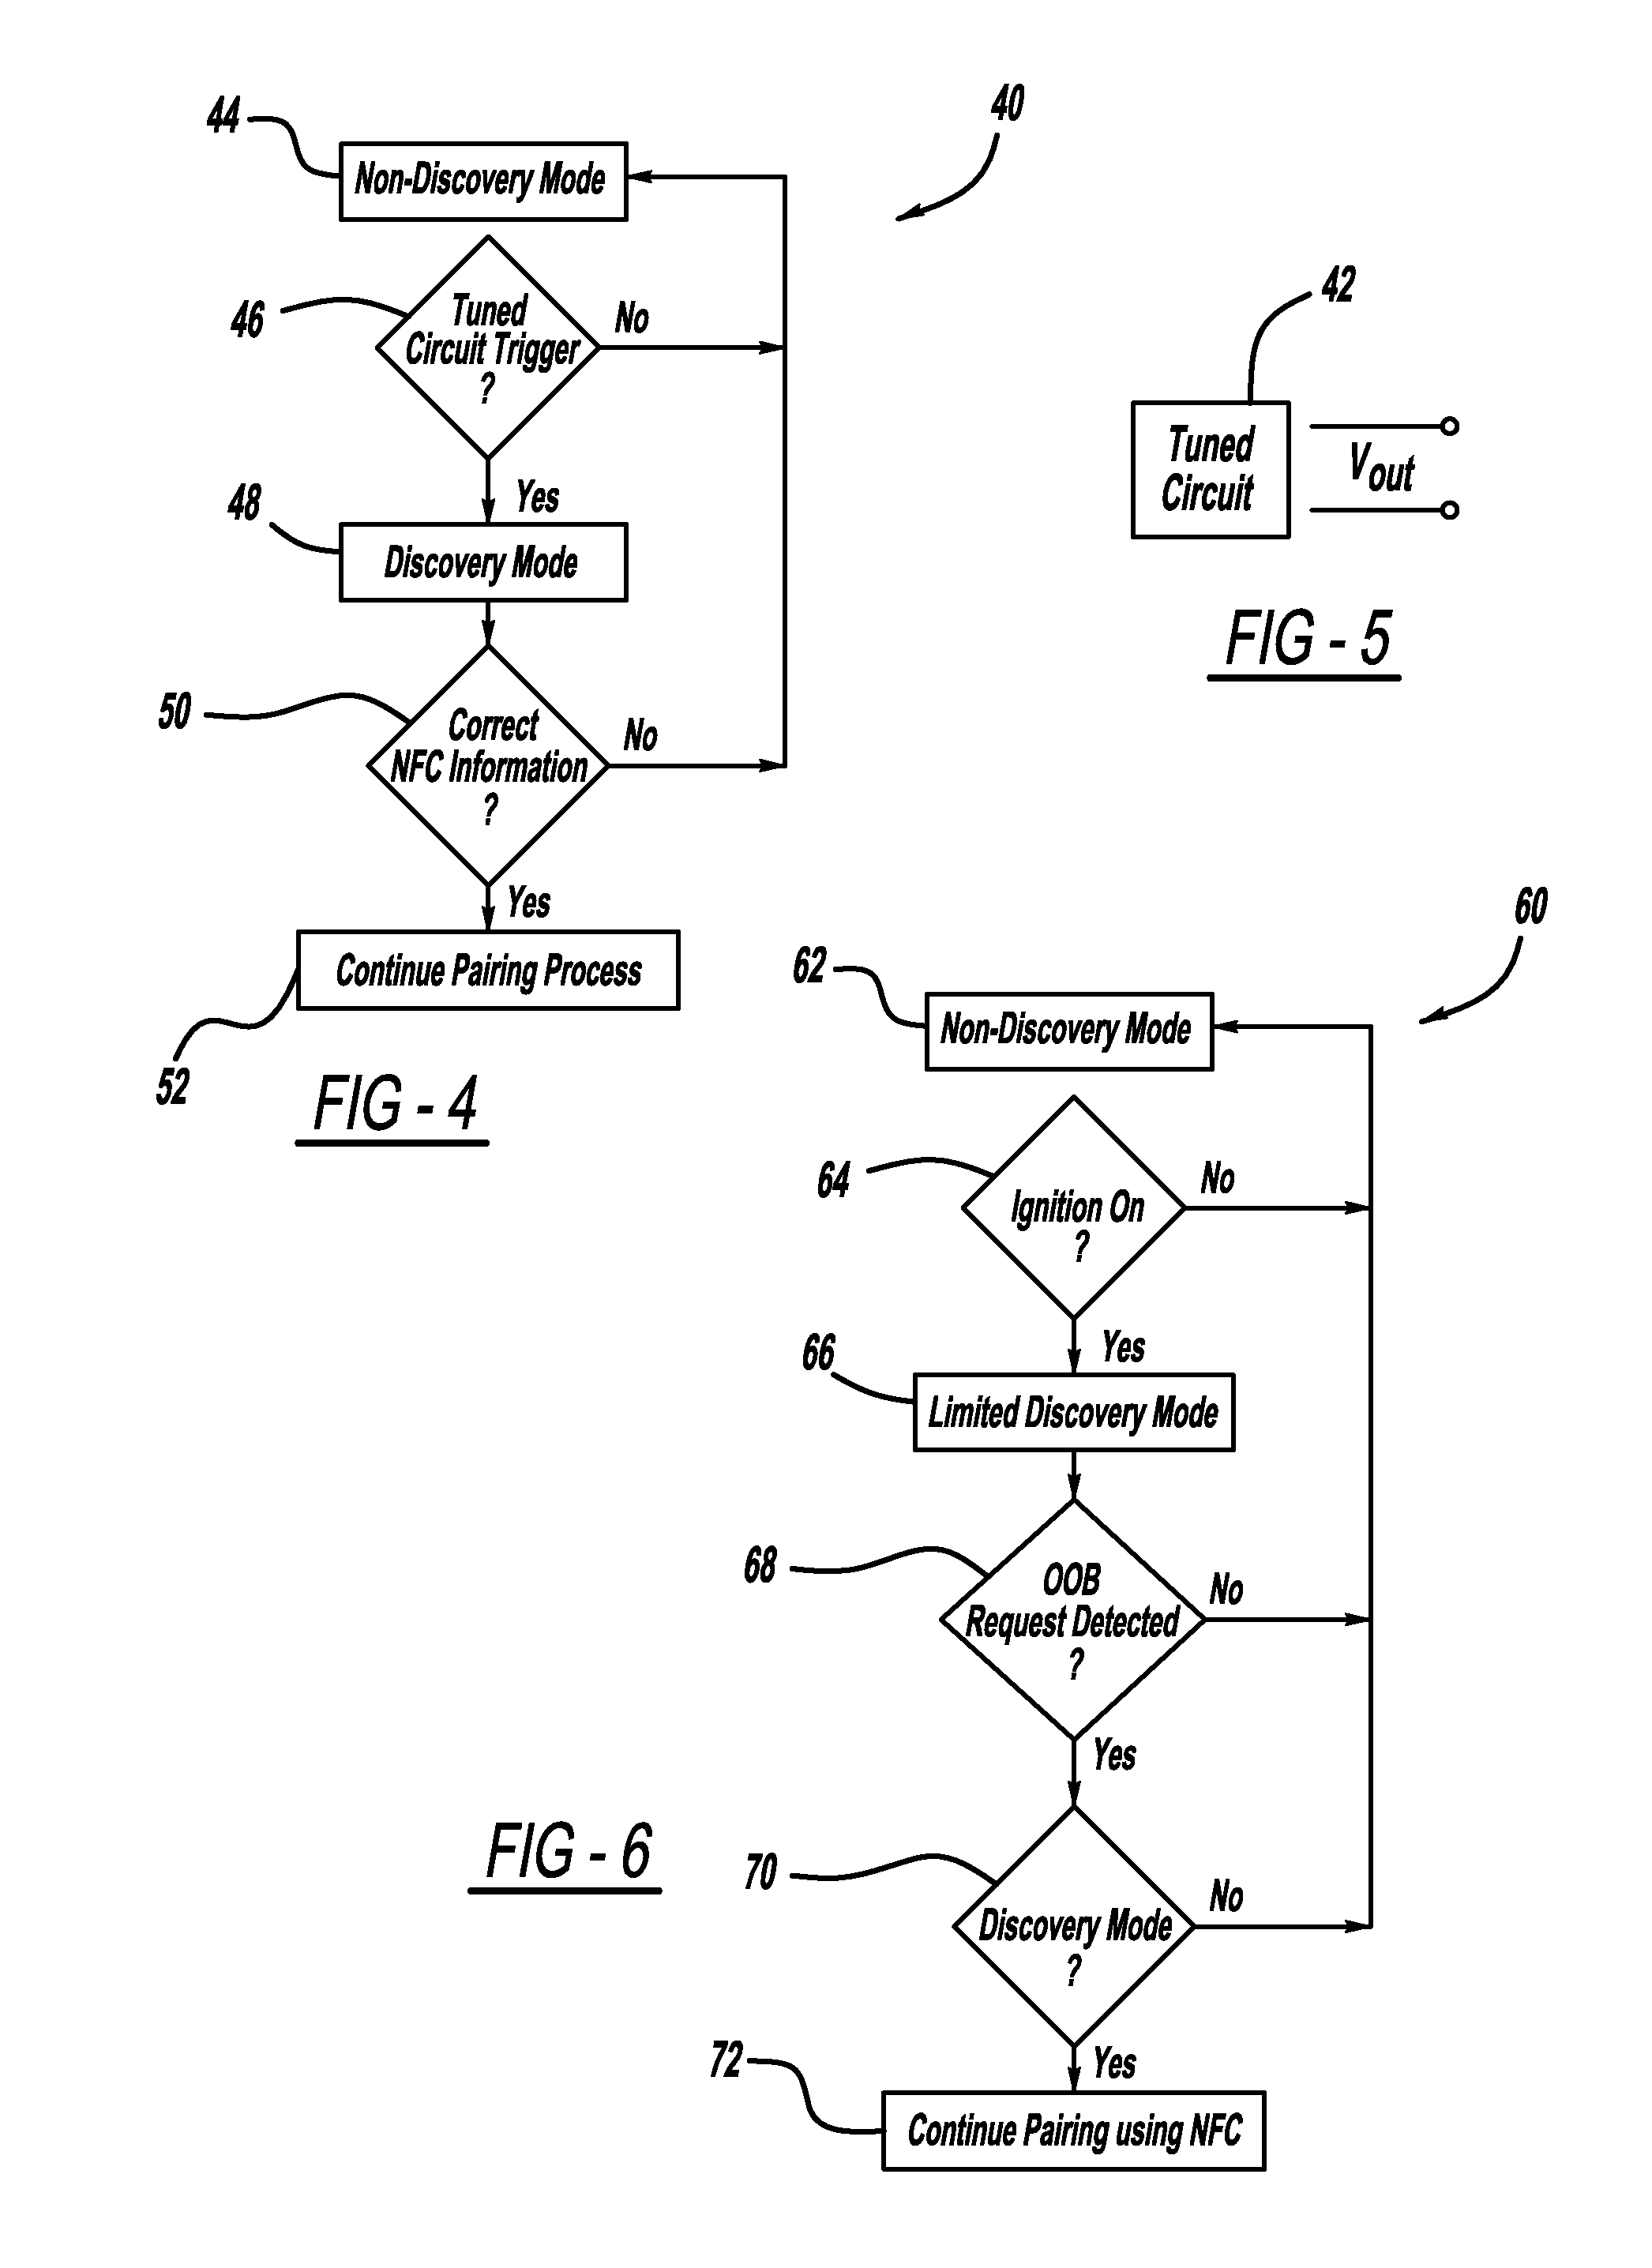 Simplified device pairing employing near field communication tags